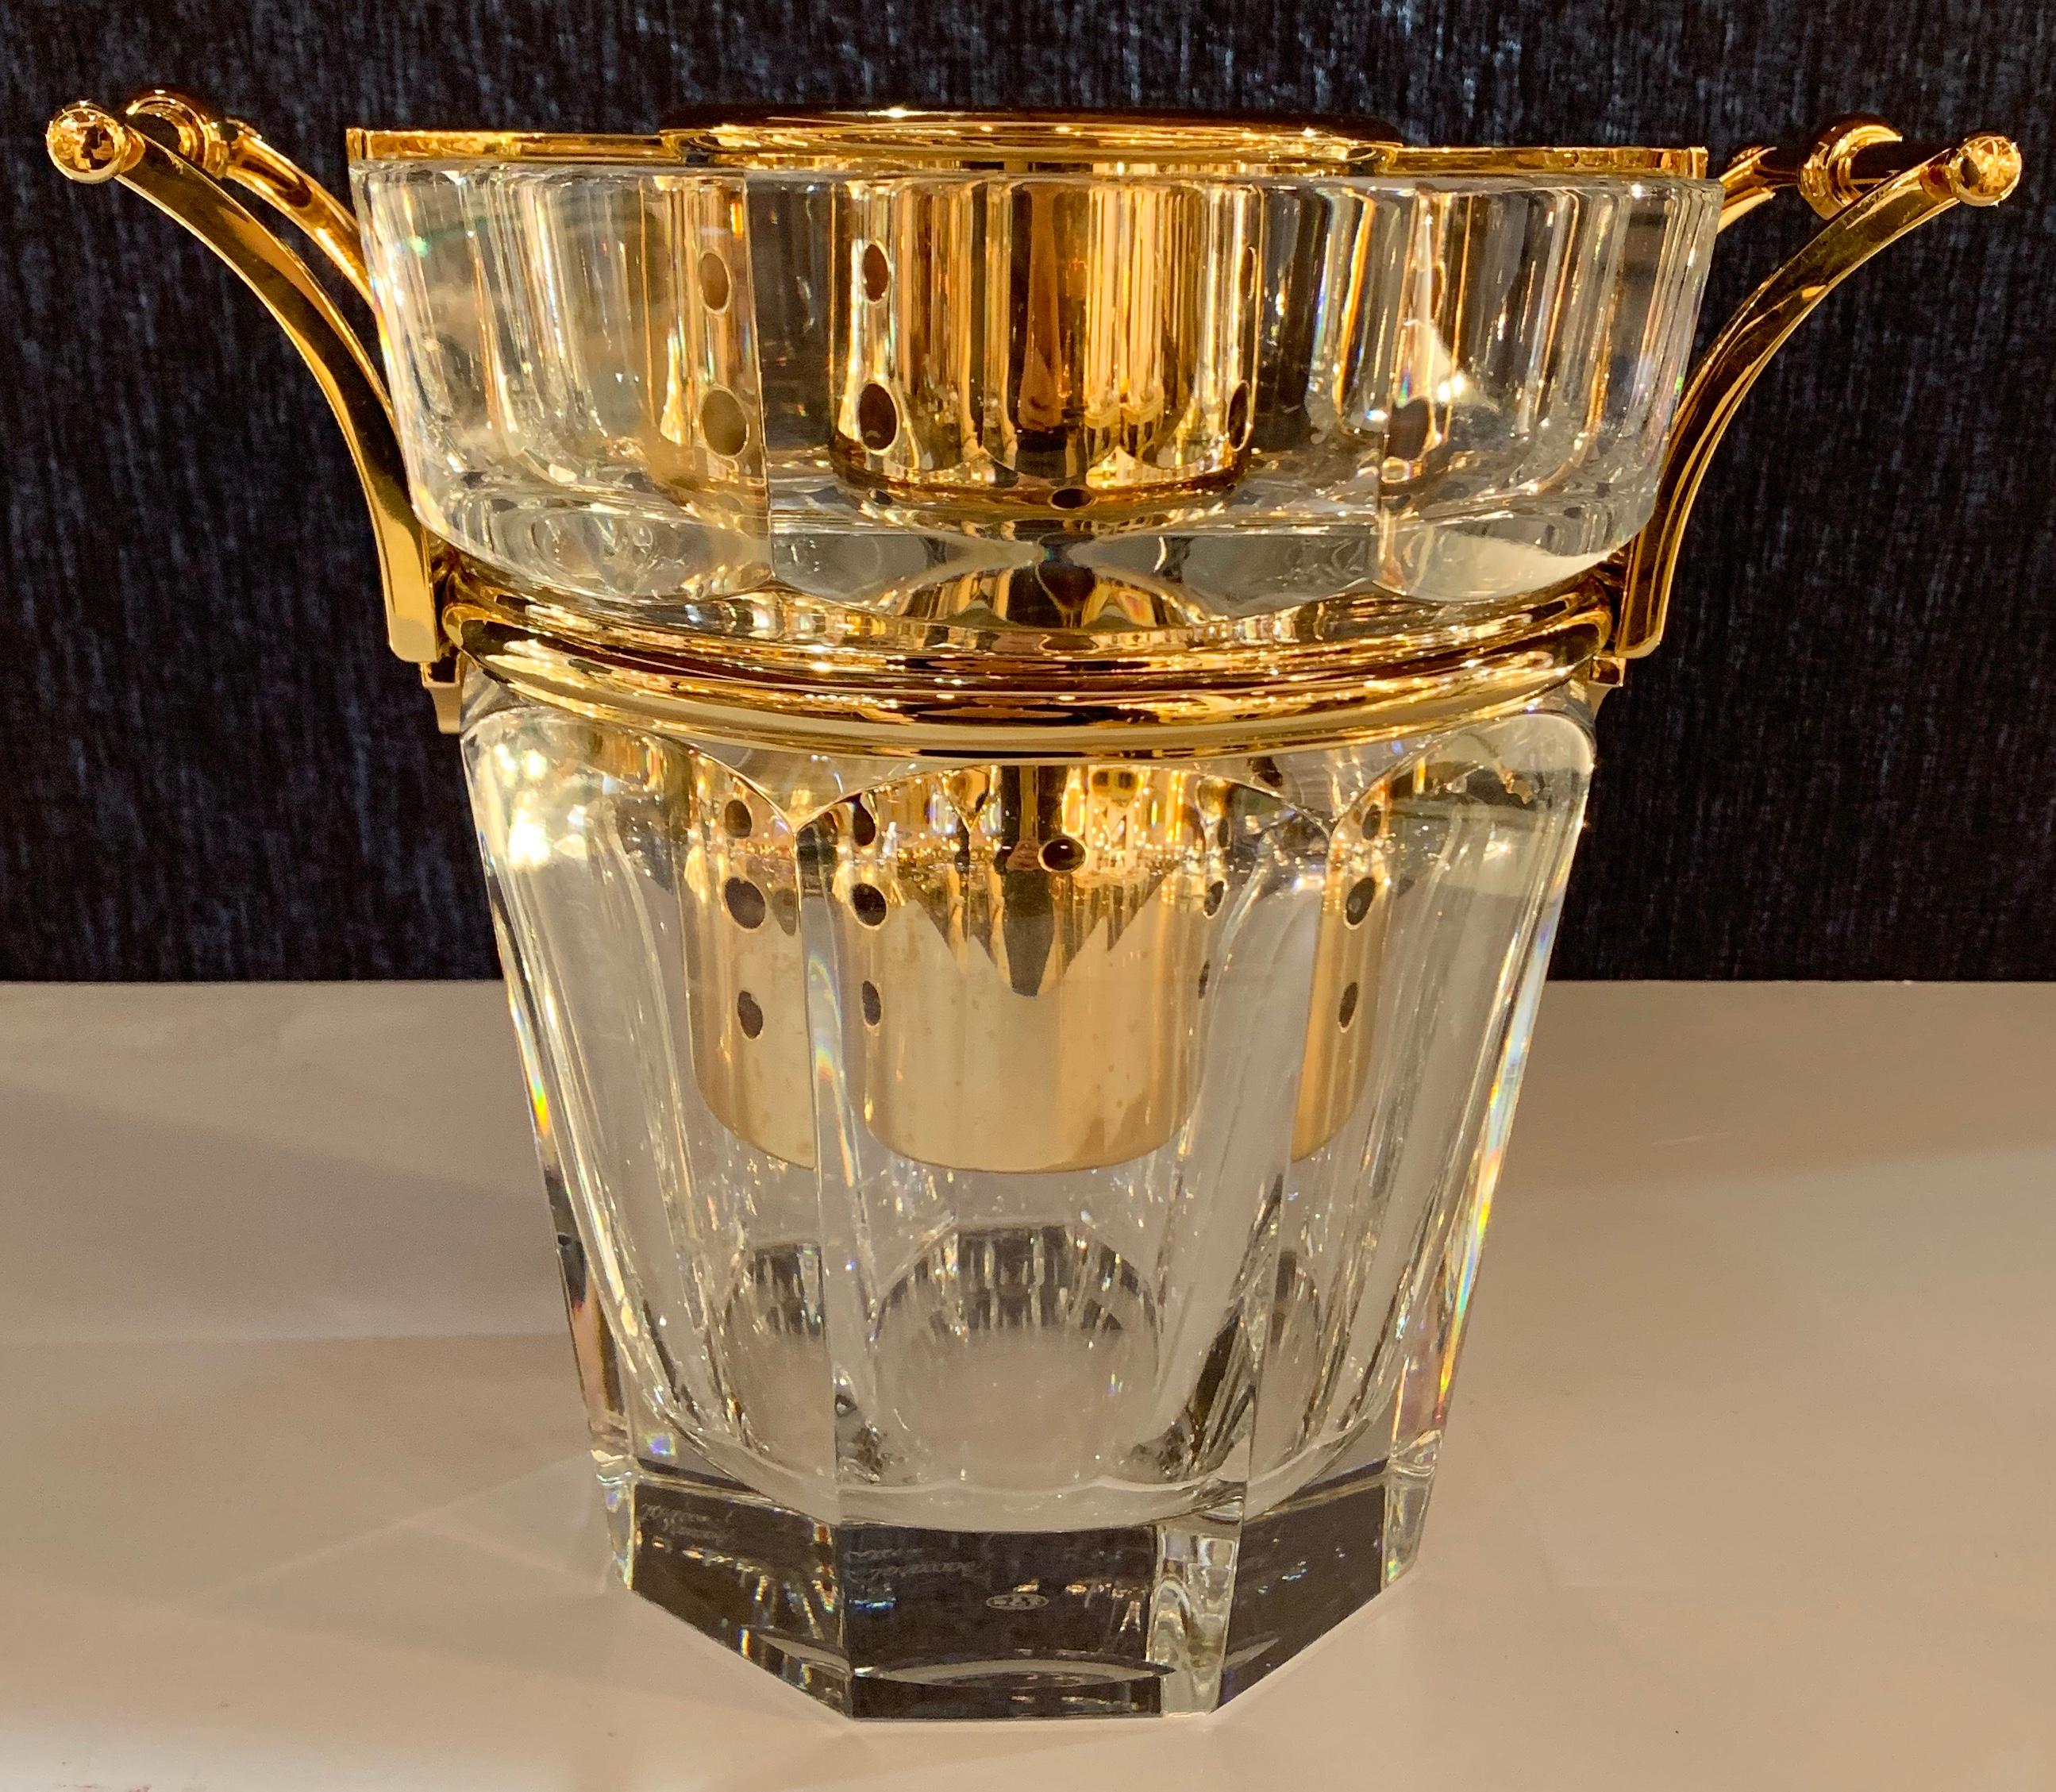 Baccarat France Harcourt crystal champagne bucket / cooler. A Classic and opulent ribbed crystal Baccarat ice bucket from one of the worlds most coveted glass manufacturers! A stunning example of the opulence of Baccarat. This French champagne